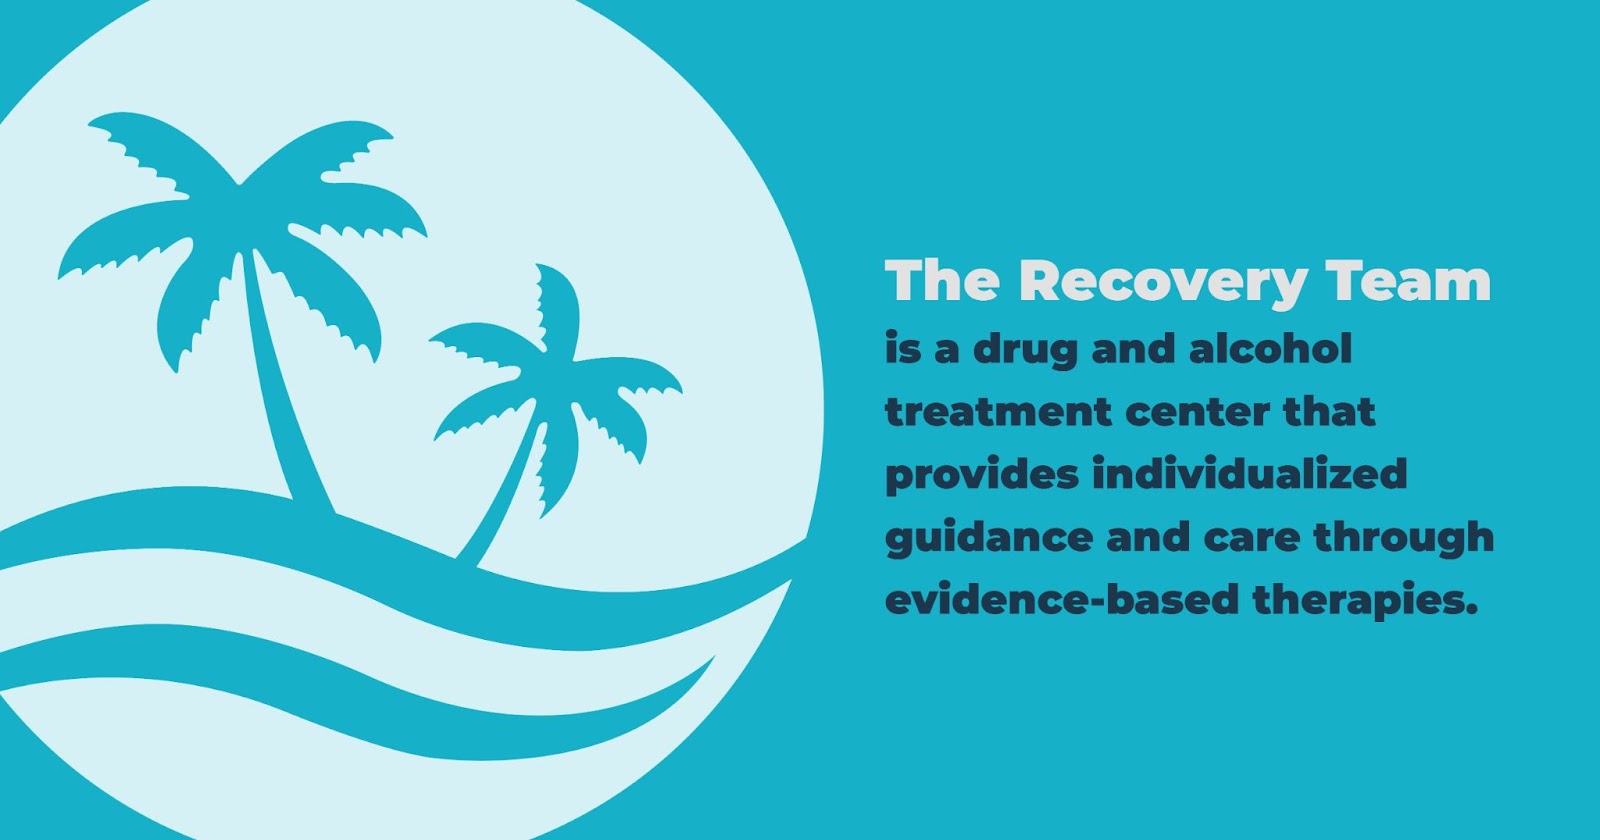 The recovery team is a drug and alcohol treatment center that provides individualized guidance and care through evidence based therapies